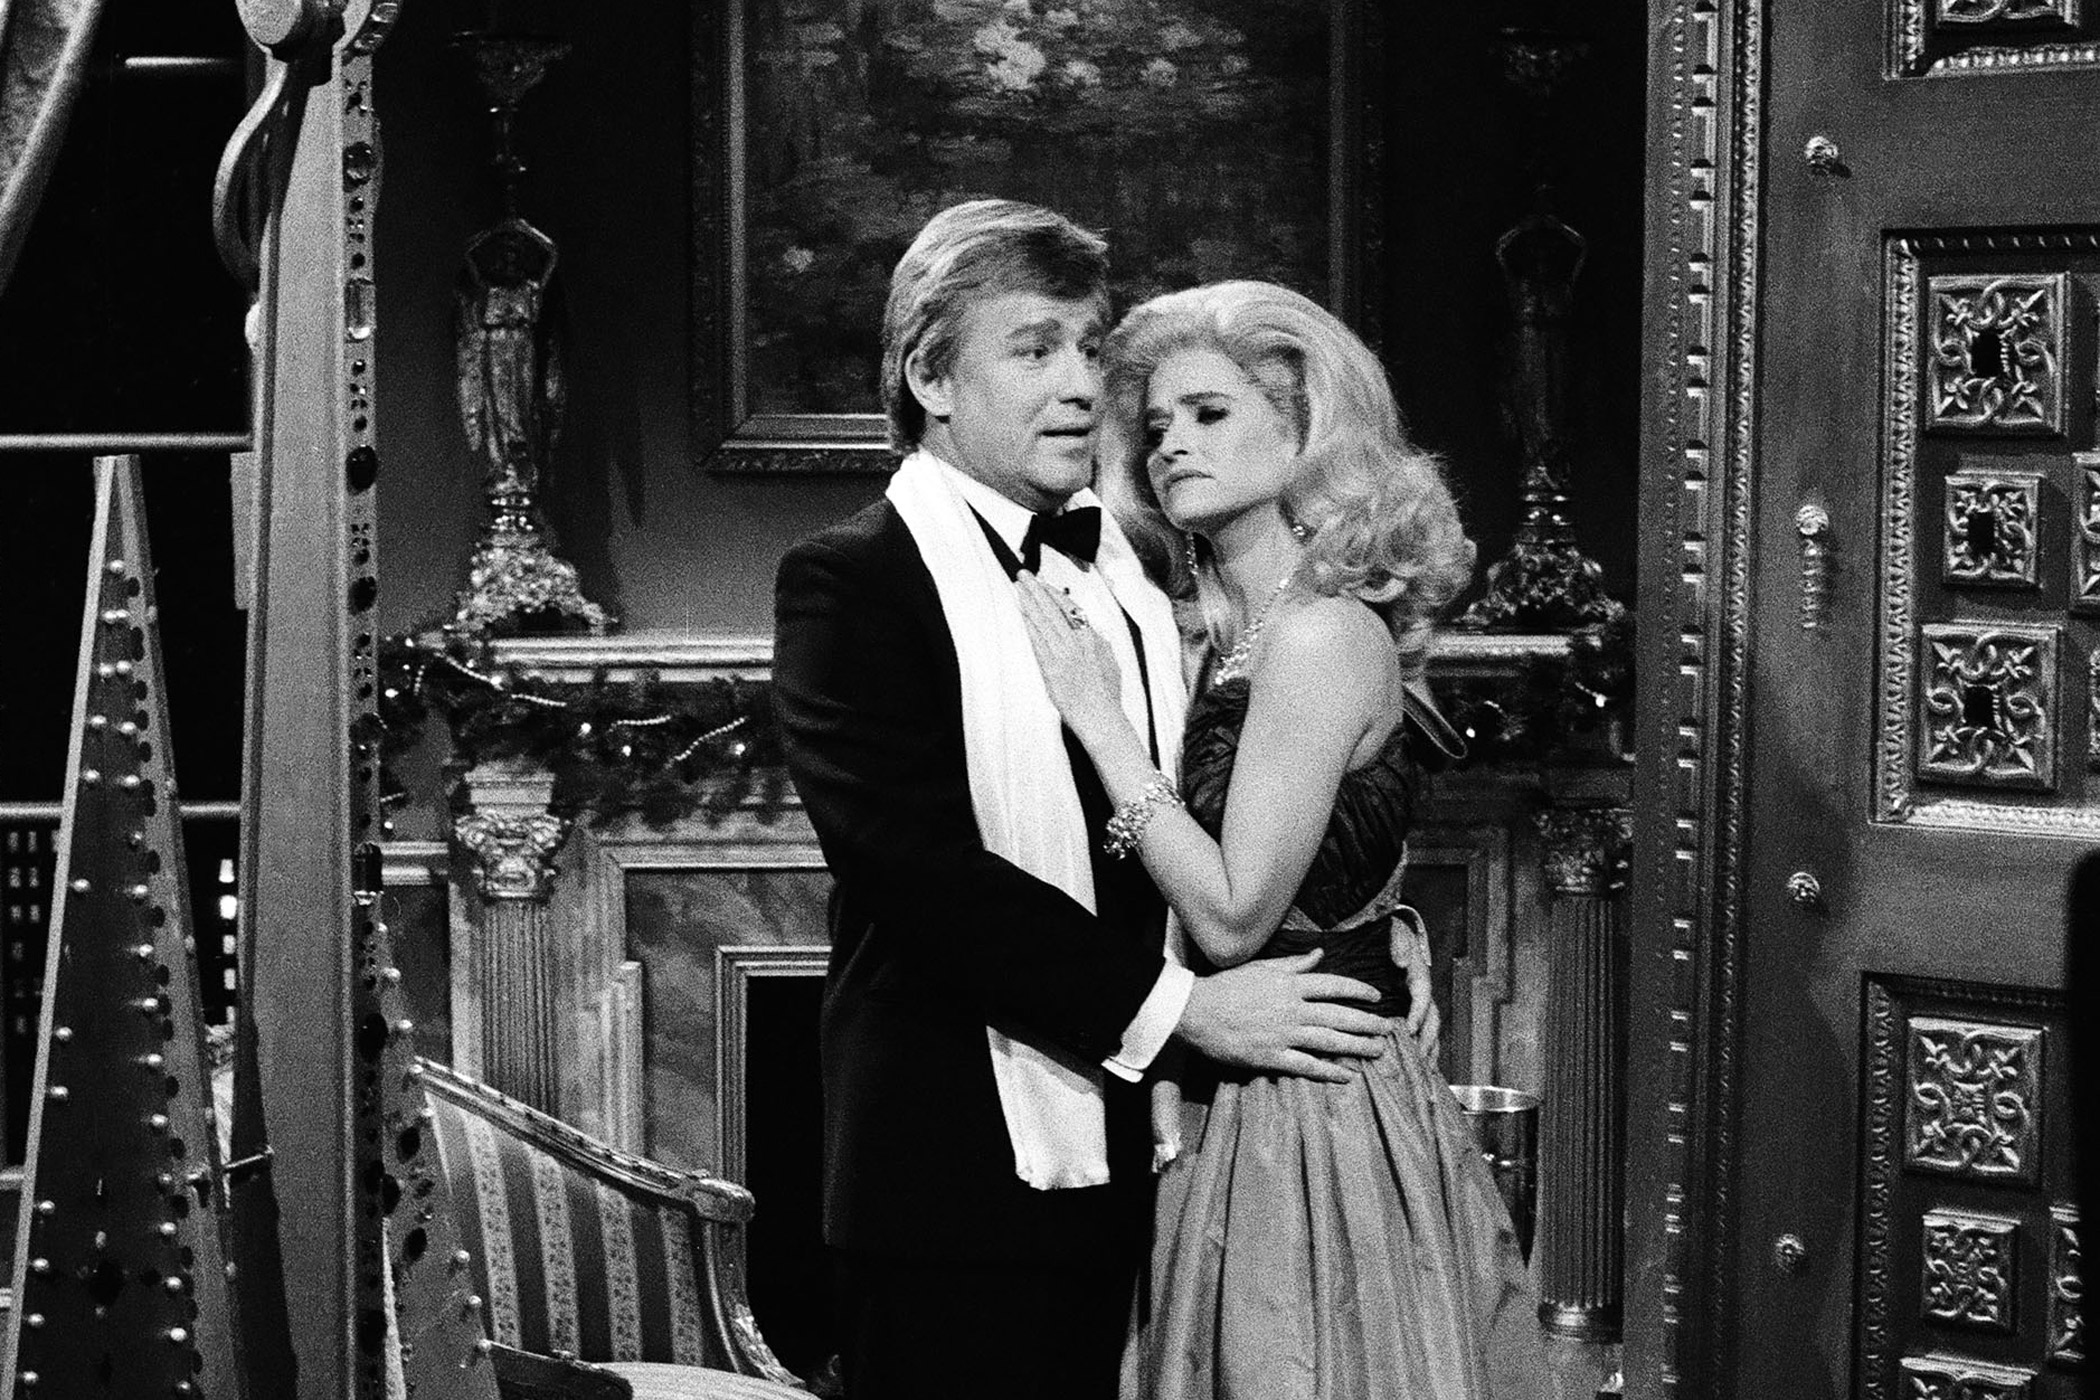 The 'Saturday Night Live' skit 'A Trump Christmas' featured Phil Hartman as Donald Trump and Jan Hooks as Ivana Trump on Dec. 10, 1988.